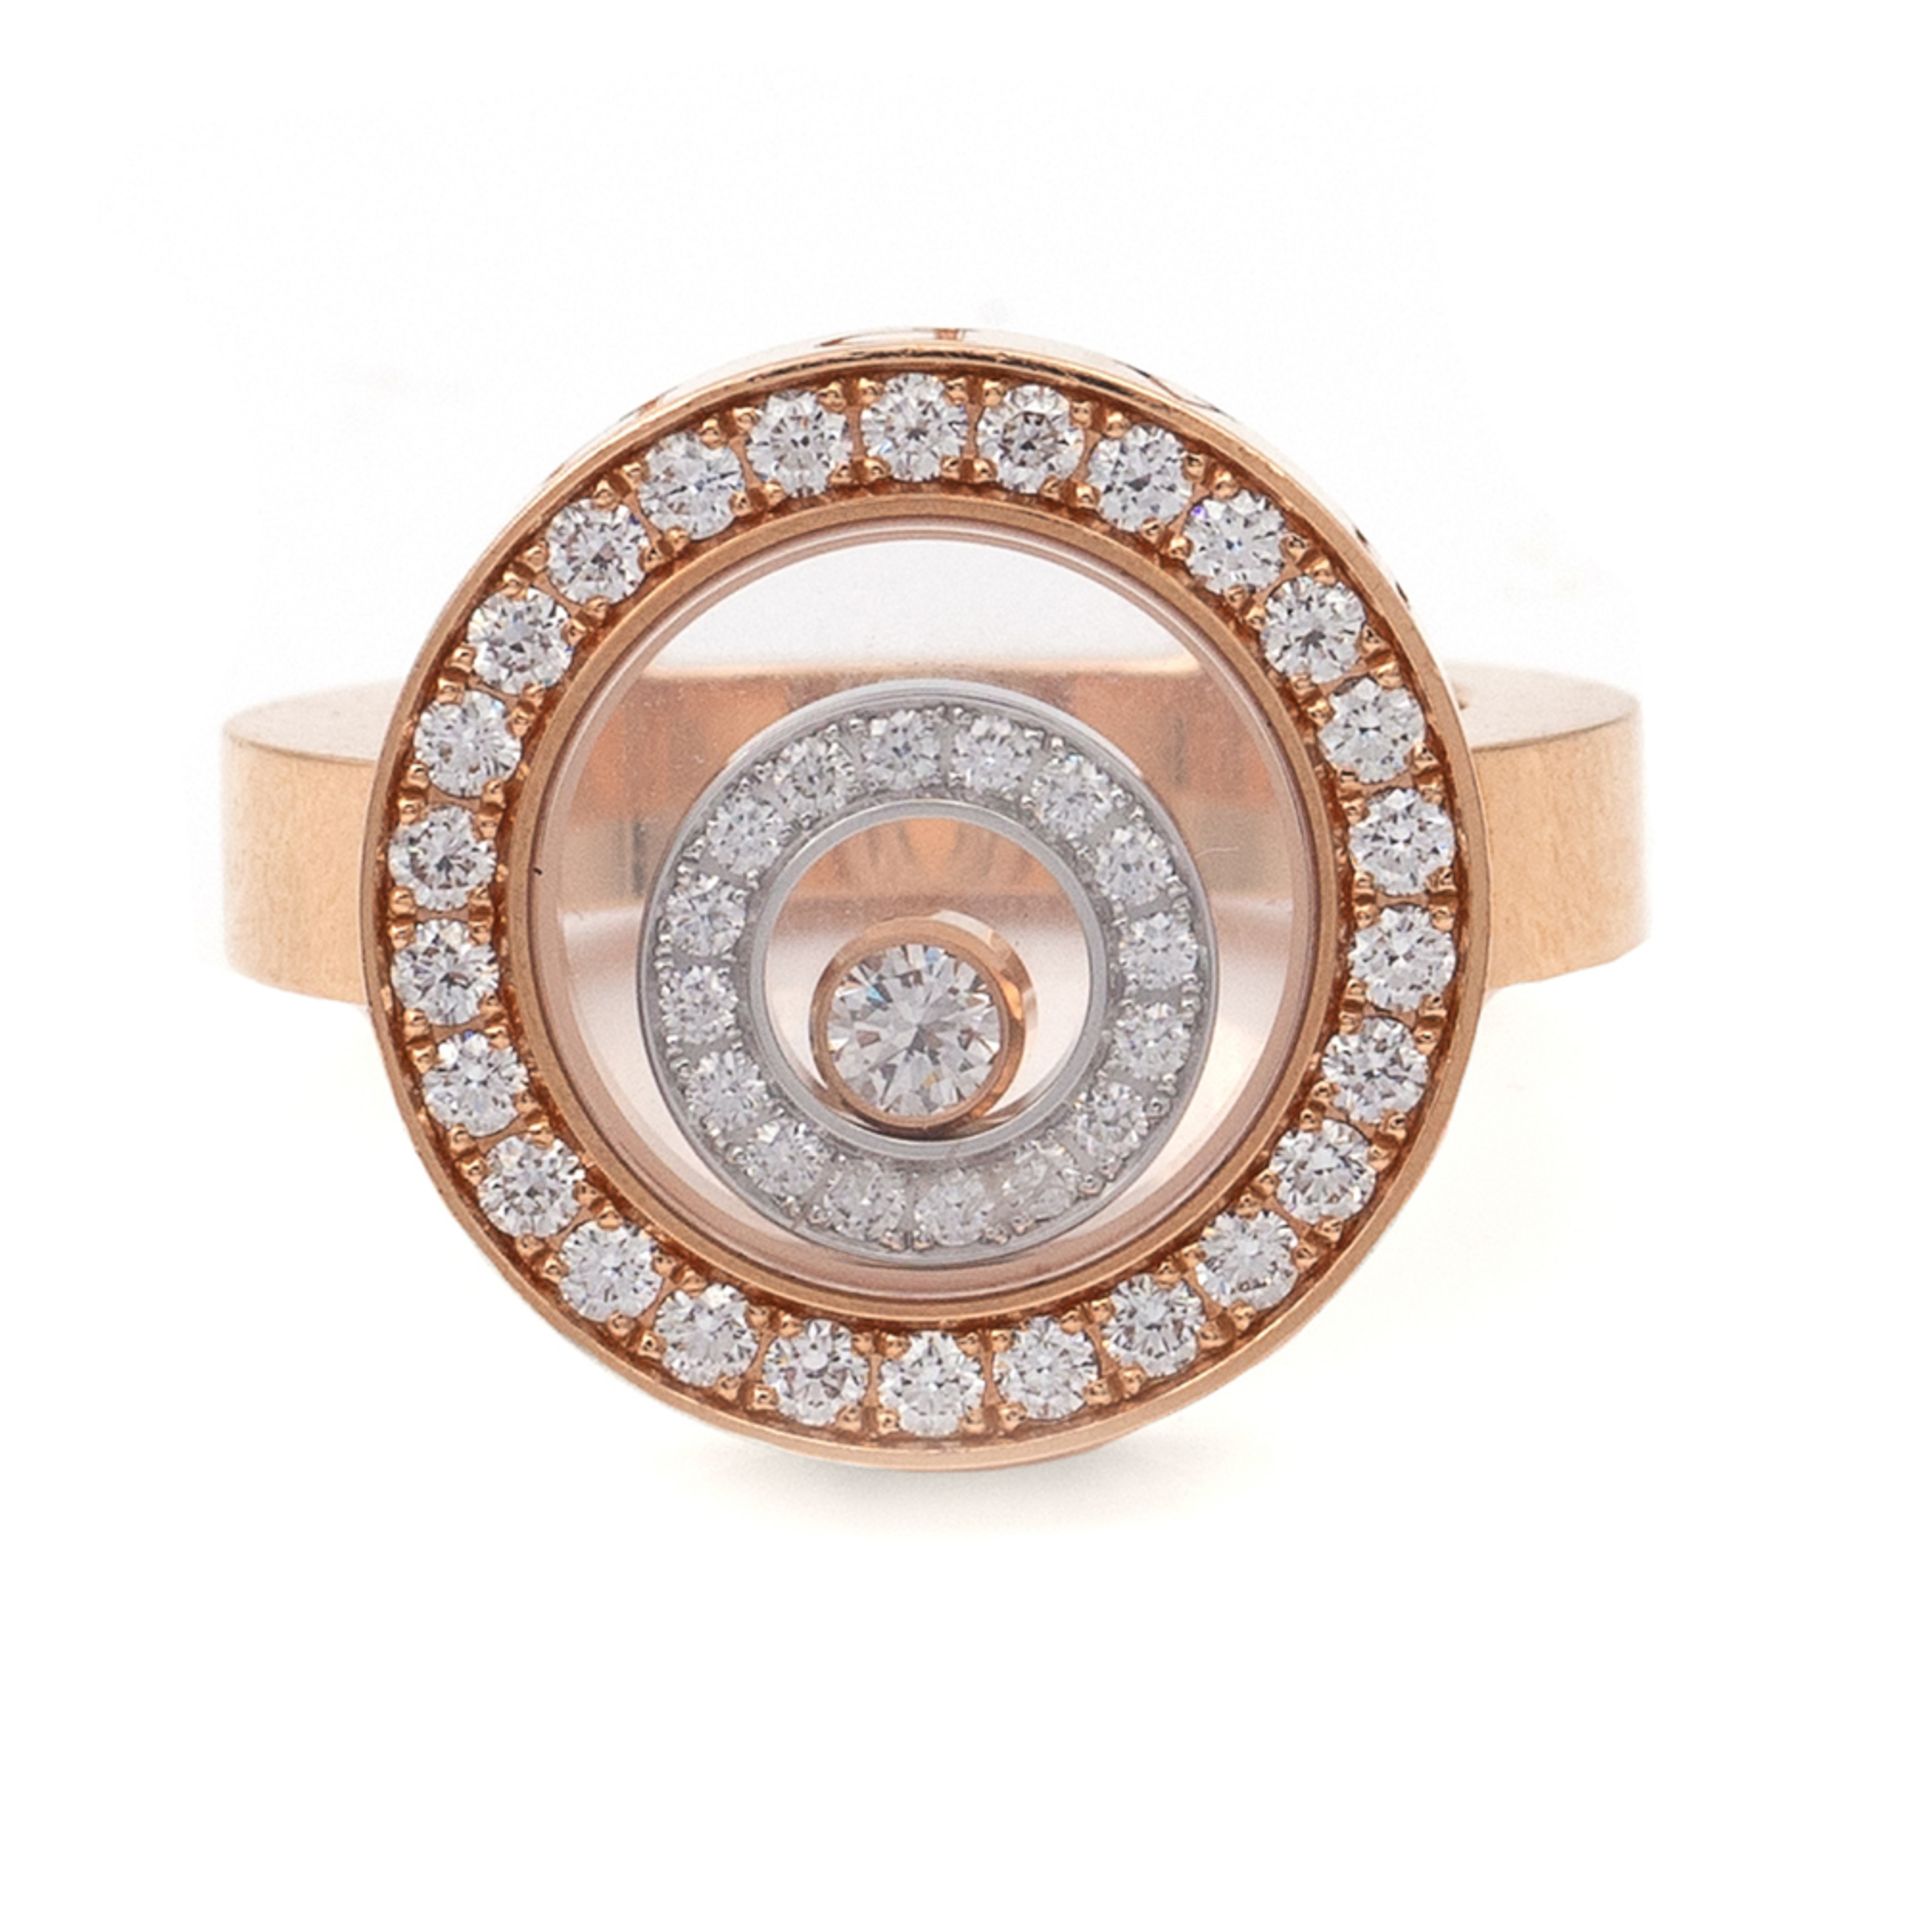 Chopard, Happy Spirit collection ring weight 17,1 gr. - Image 3 of 3